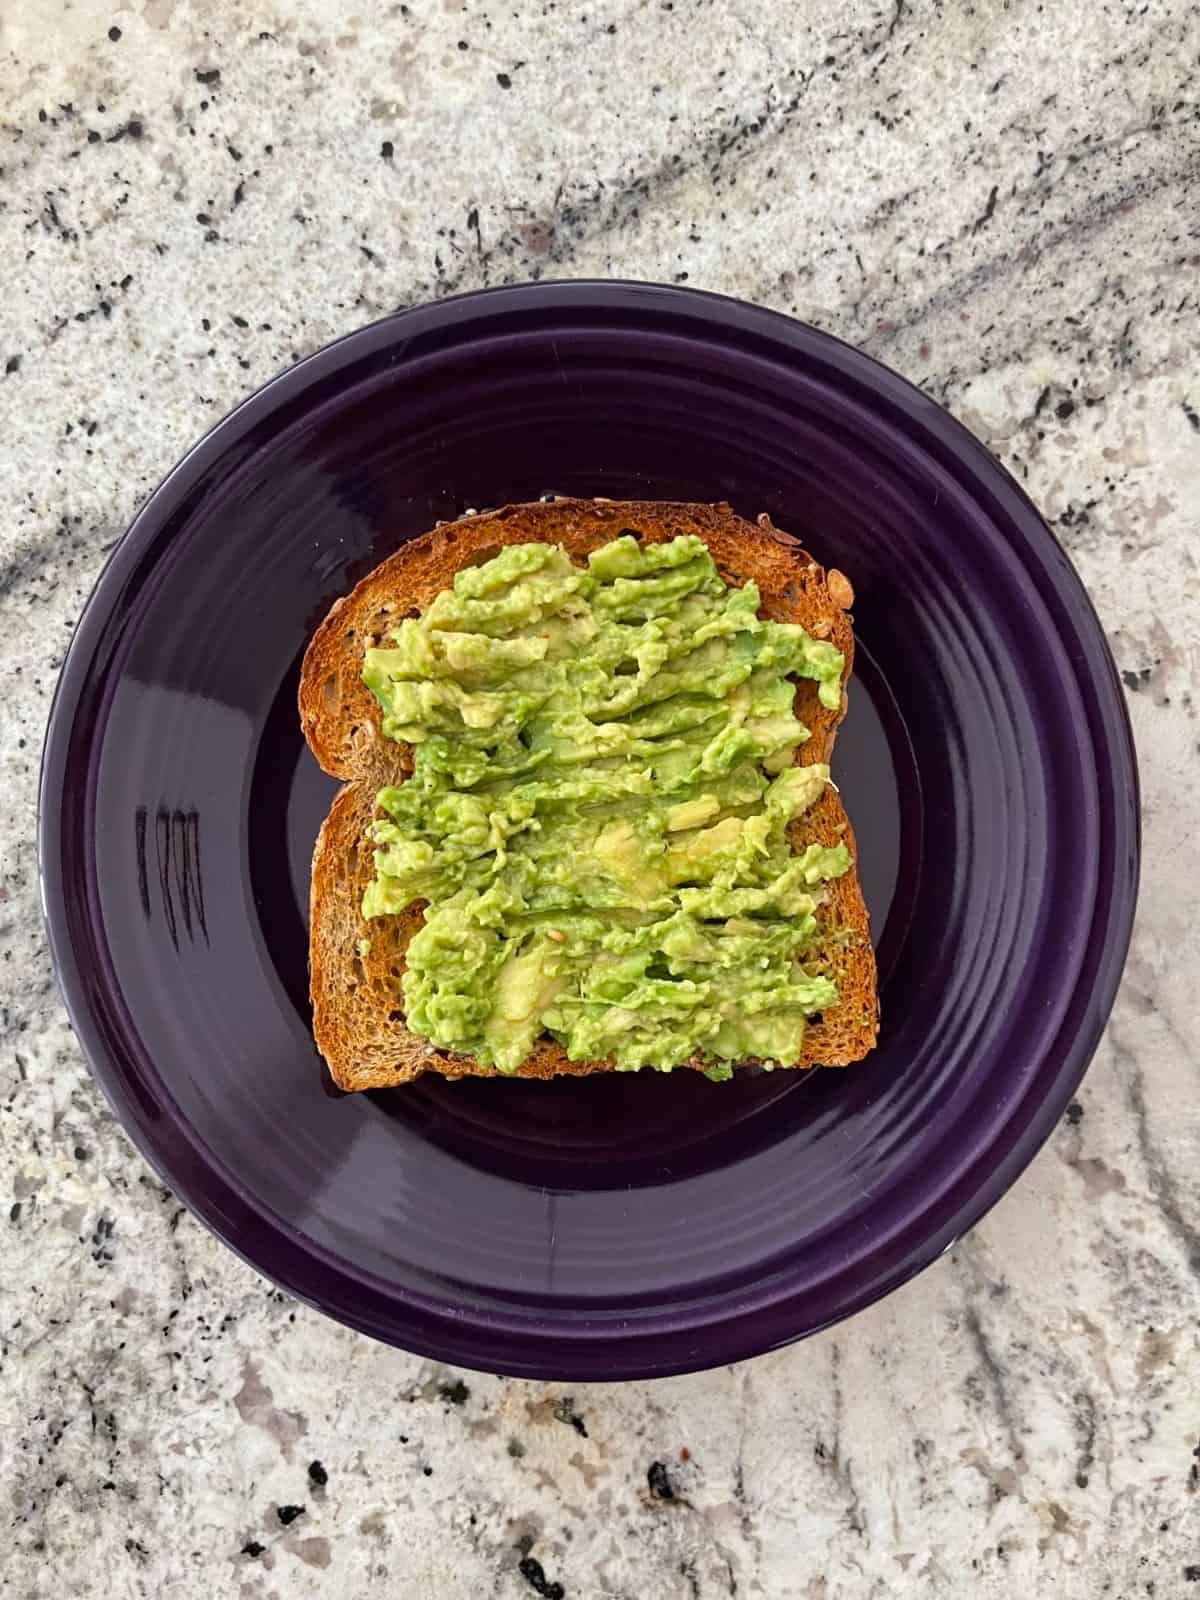 Mashed avocado on toasted whole grain bread on purple plate.